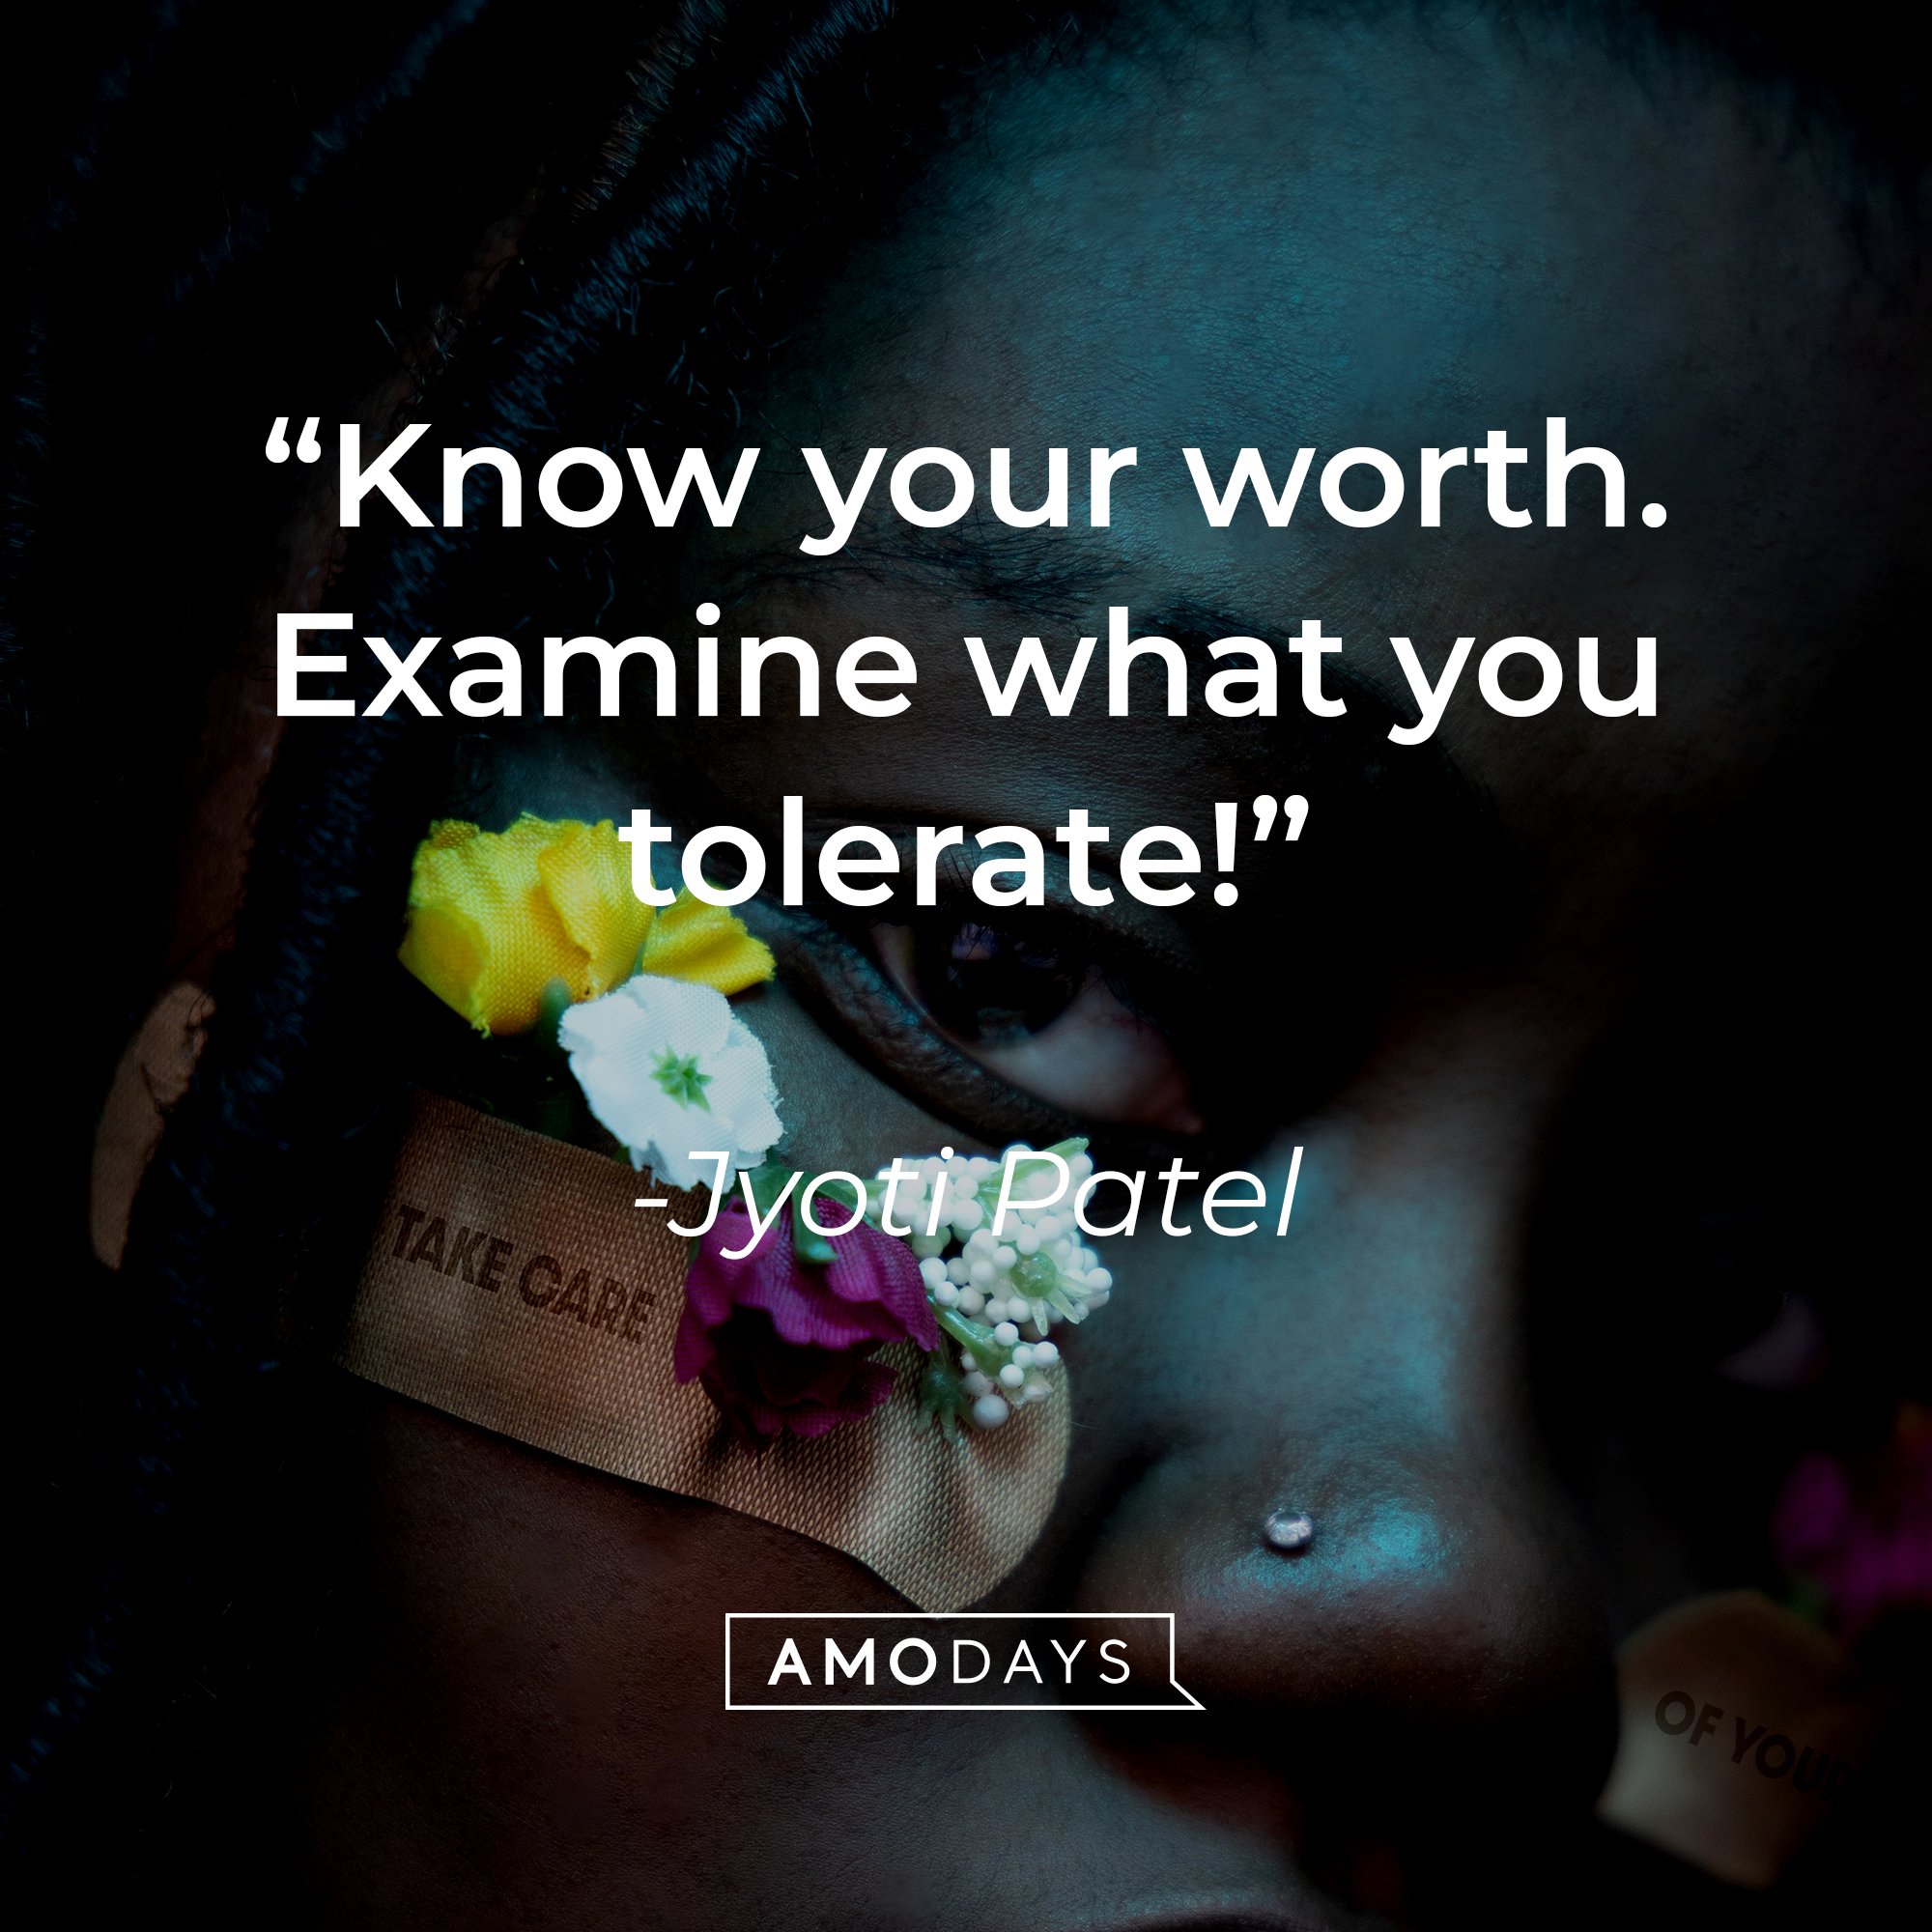 Jyoti Patel's quote: “Know your worth. Examine what you tolerate!” | Image: AmiDays